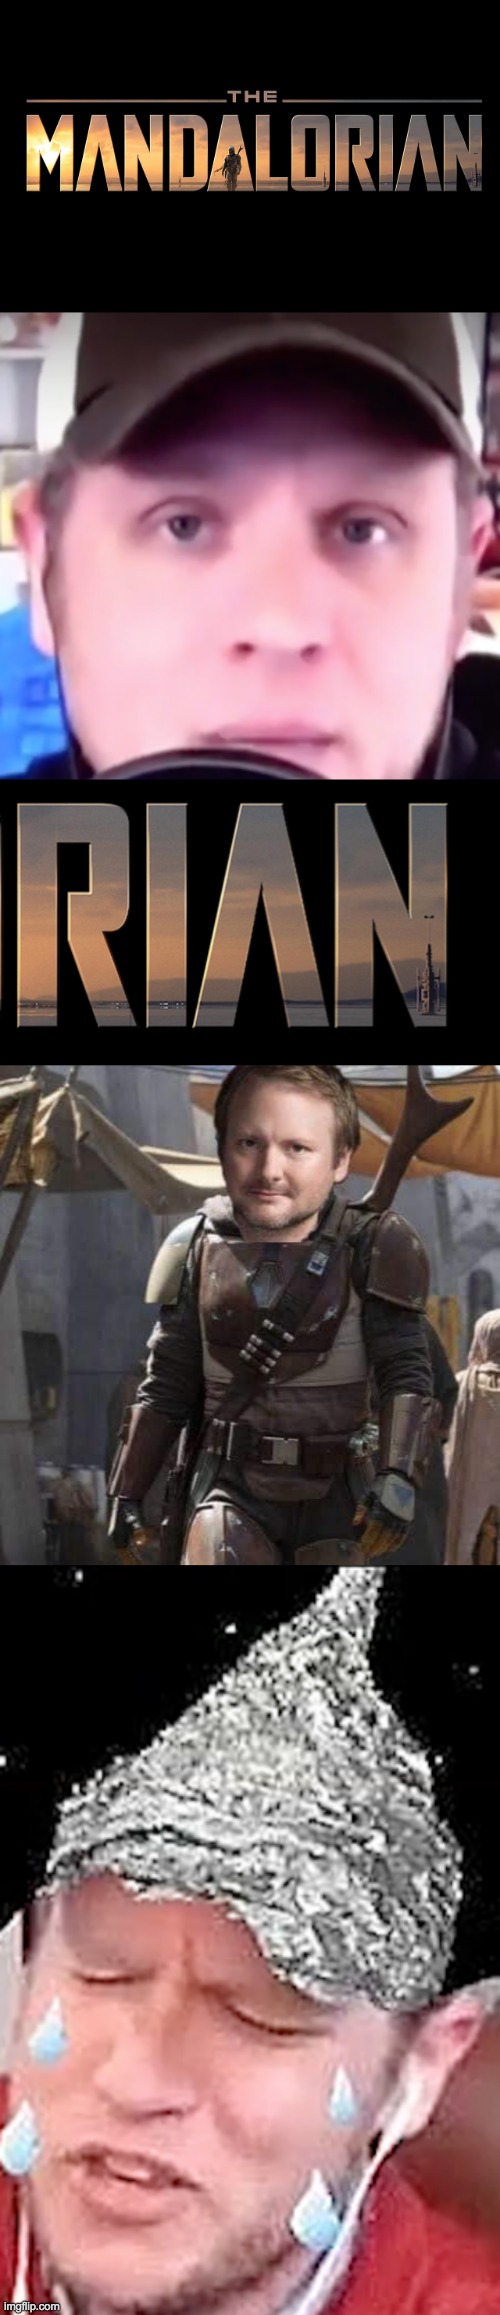 MandaloRIAN | image tagged in star wars,the mandalorian,alt-right,angry baby,rian johnson | made w/ Imgflip meme maker